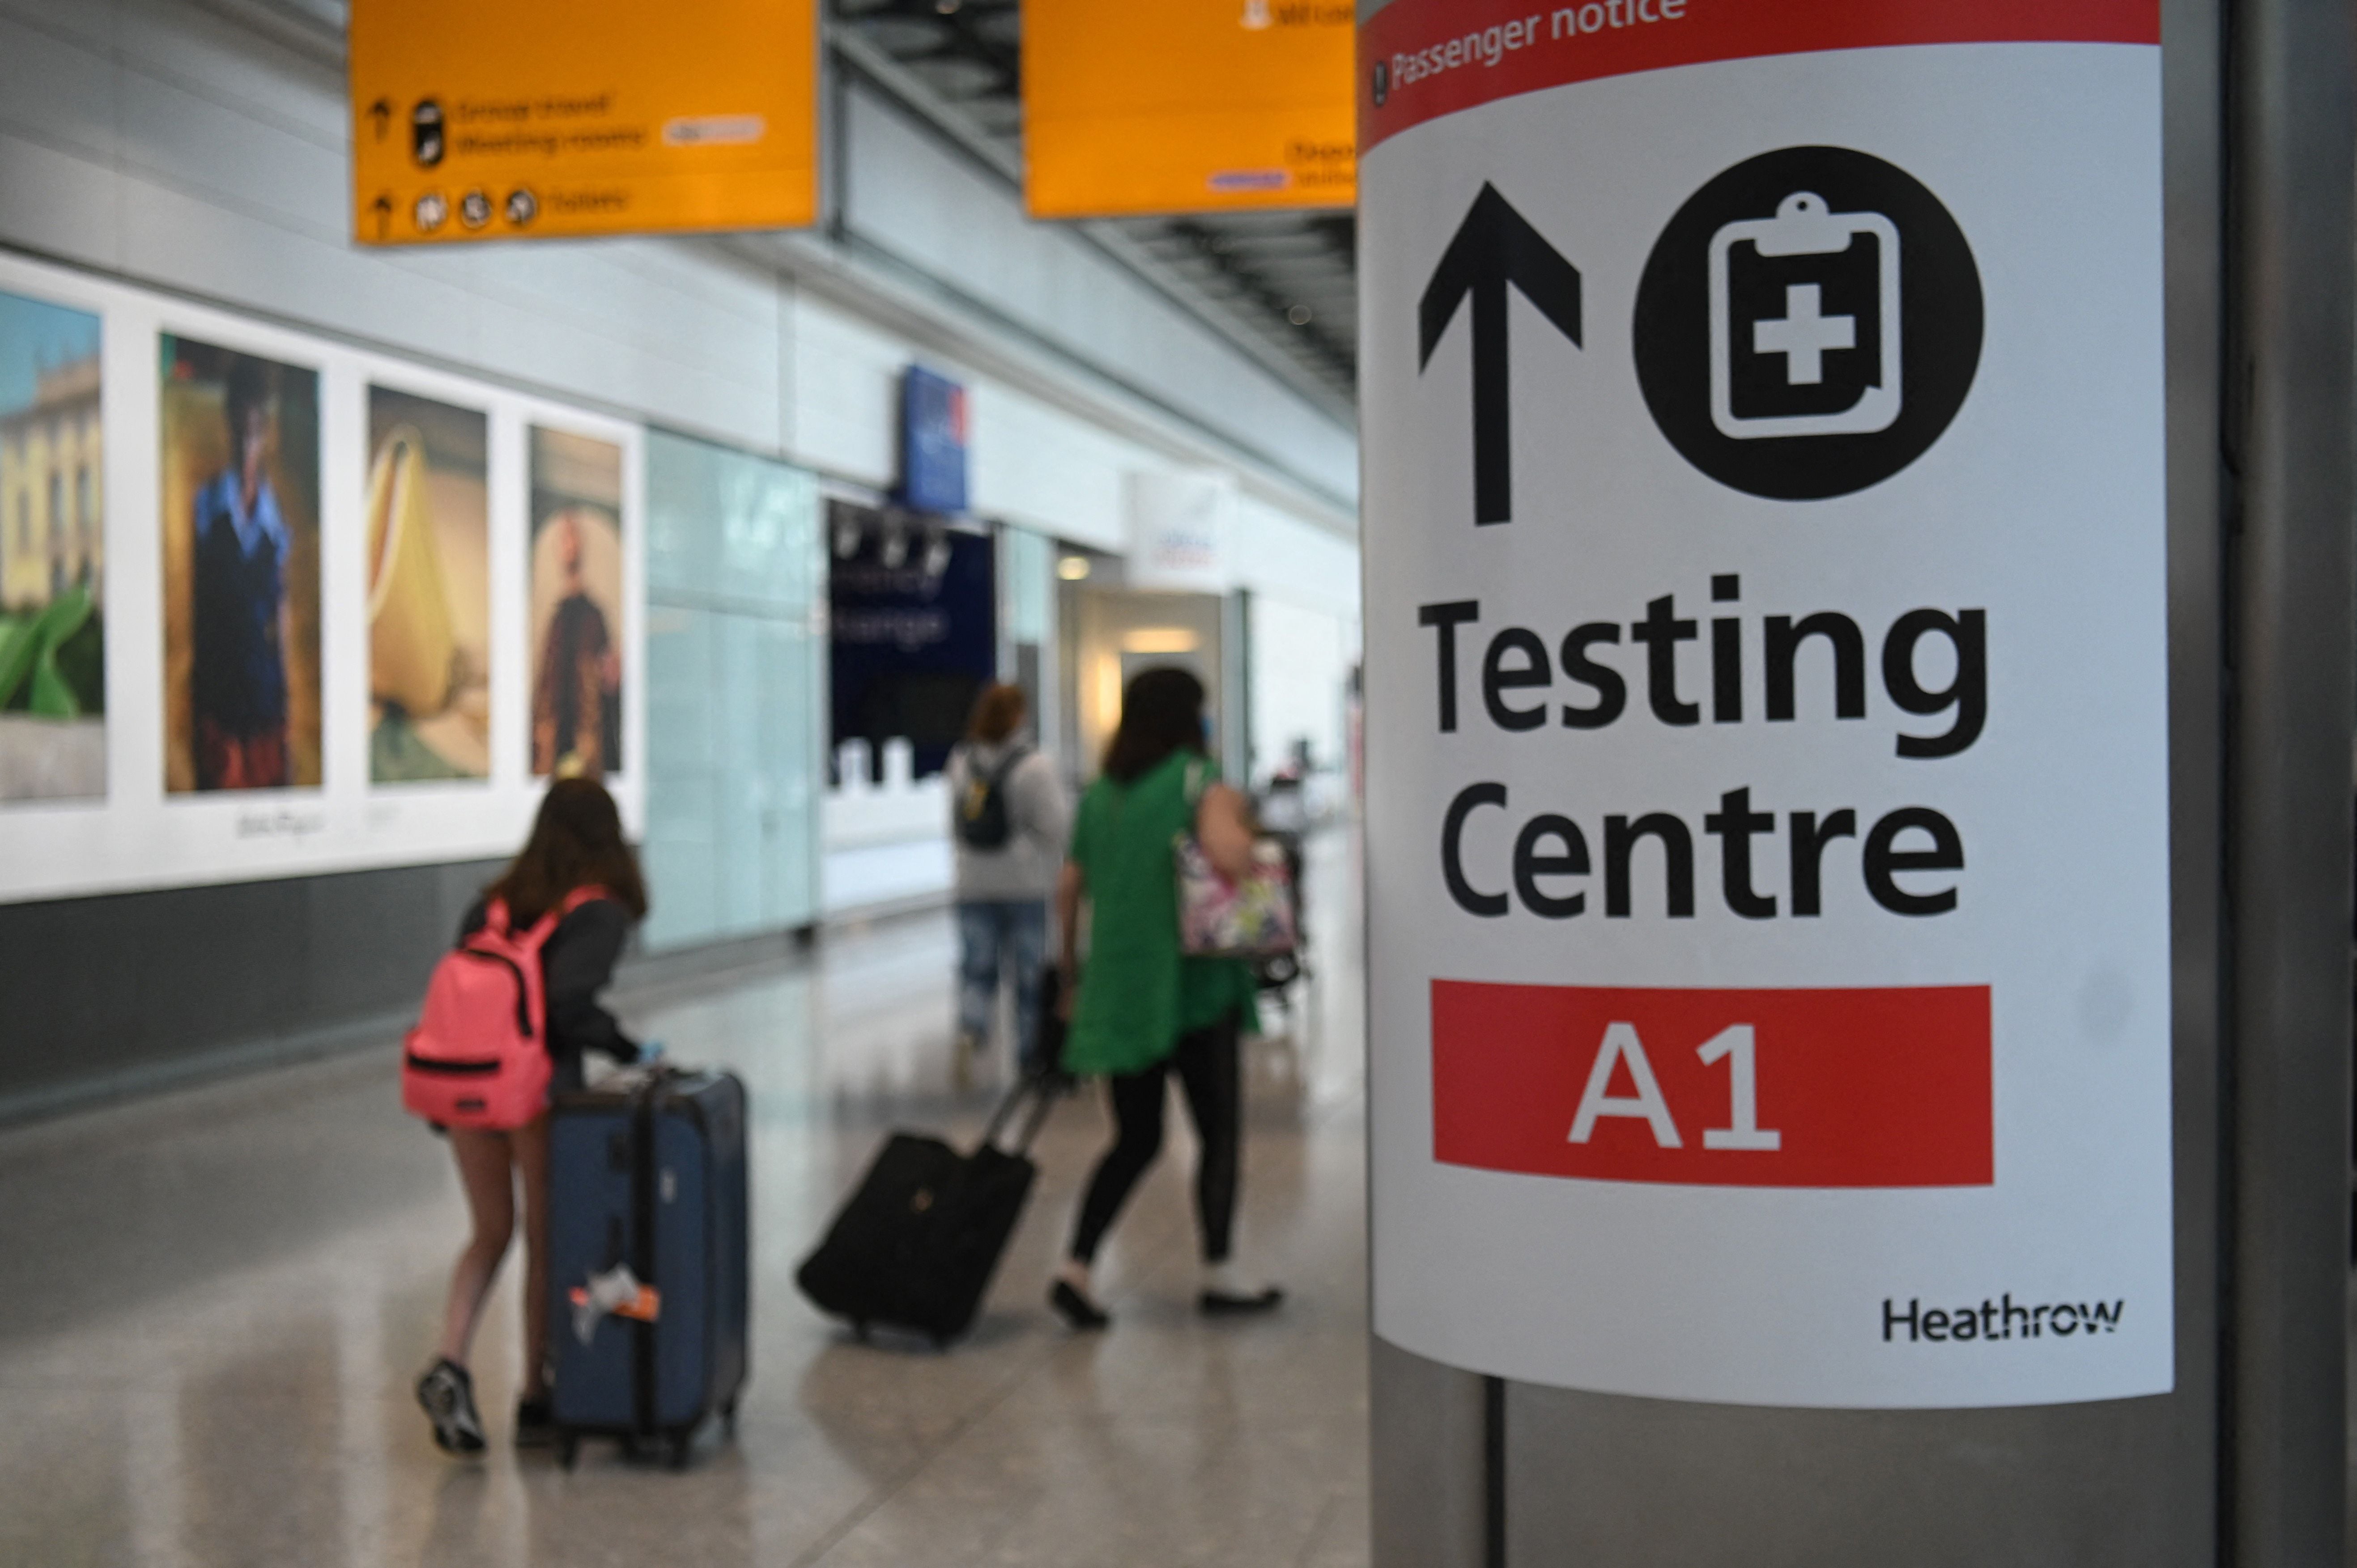 Tests must be taken on the day of departure to the UK or on one of the previous two days